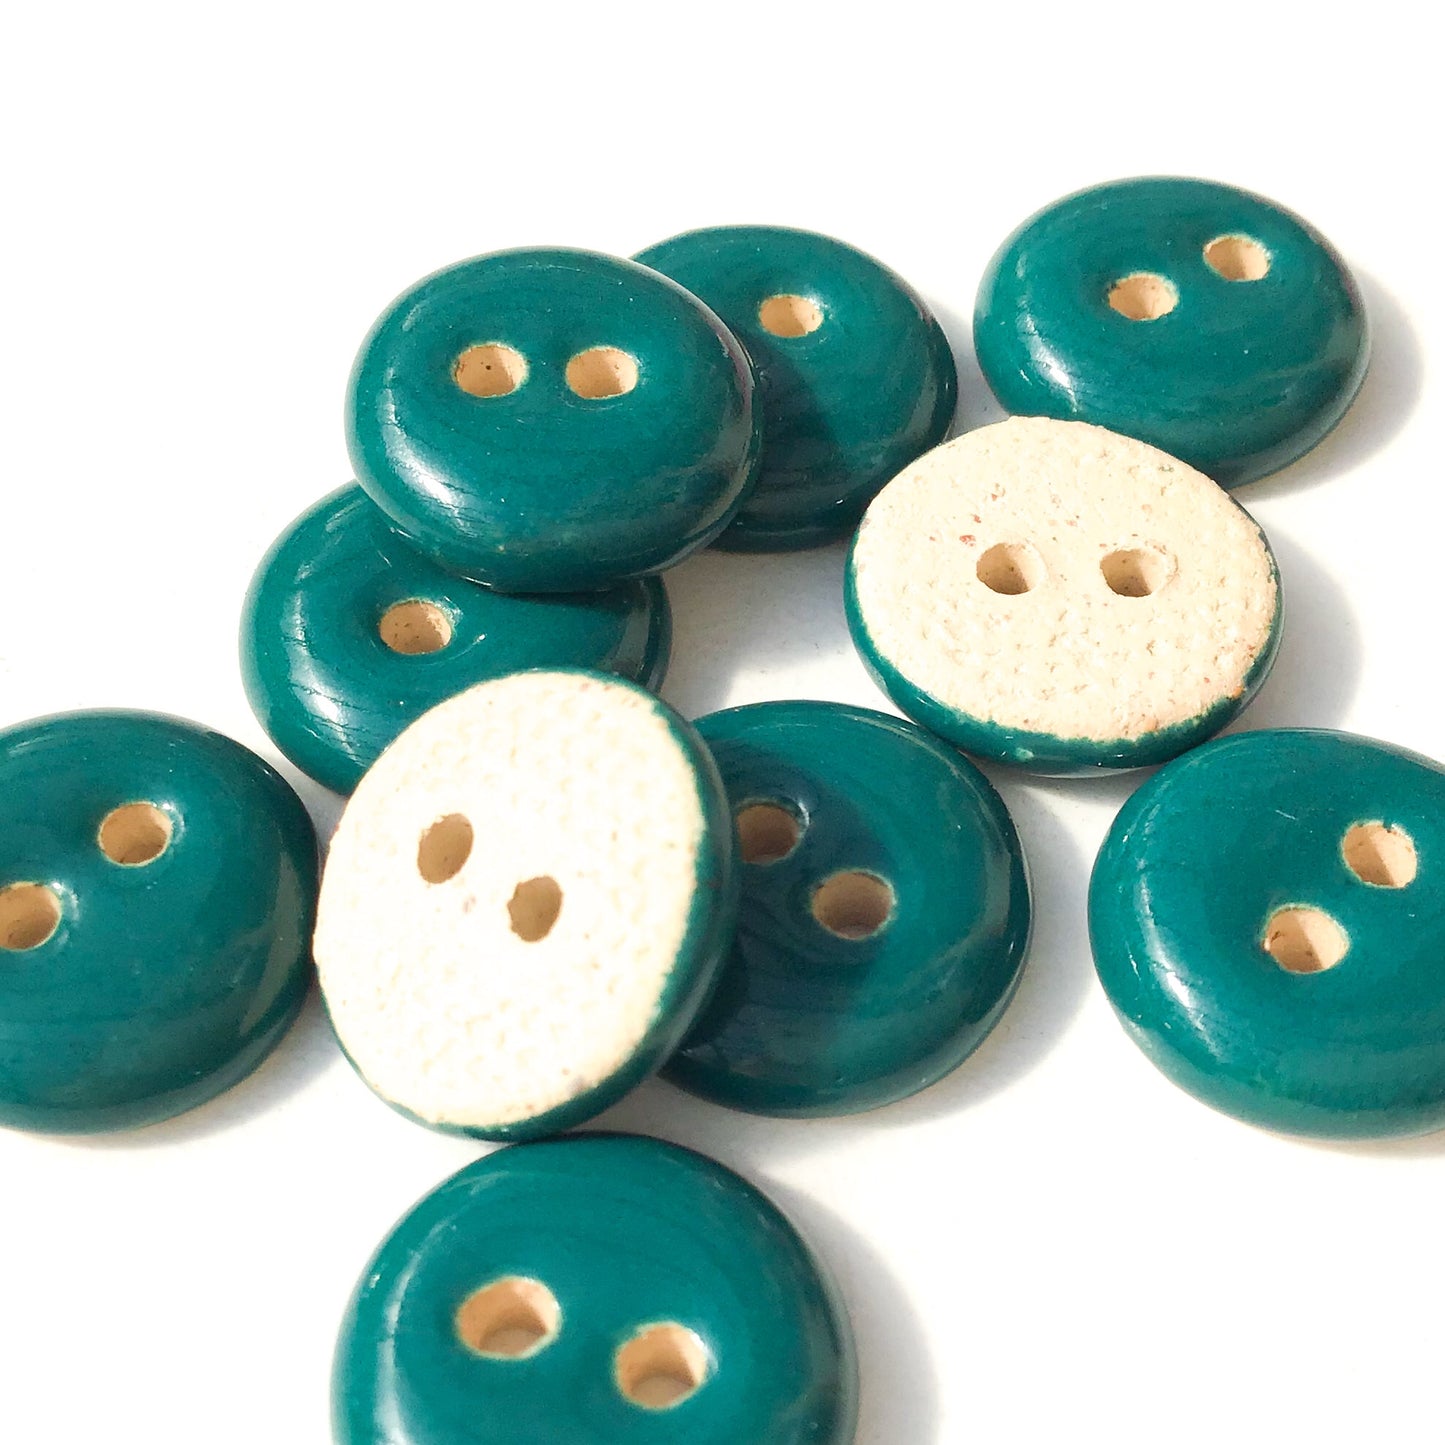 Teal Ceramic Buttons - Teal Clay Buttons - 9/16" - 10 Pack